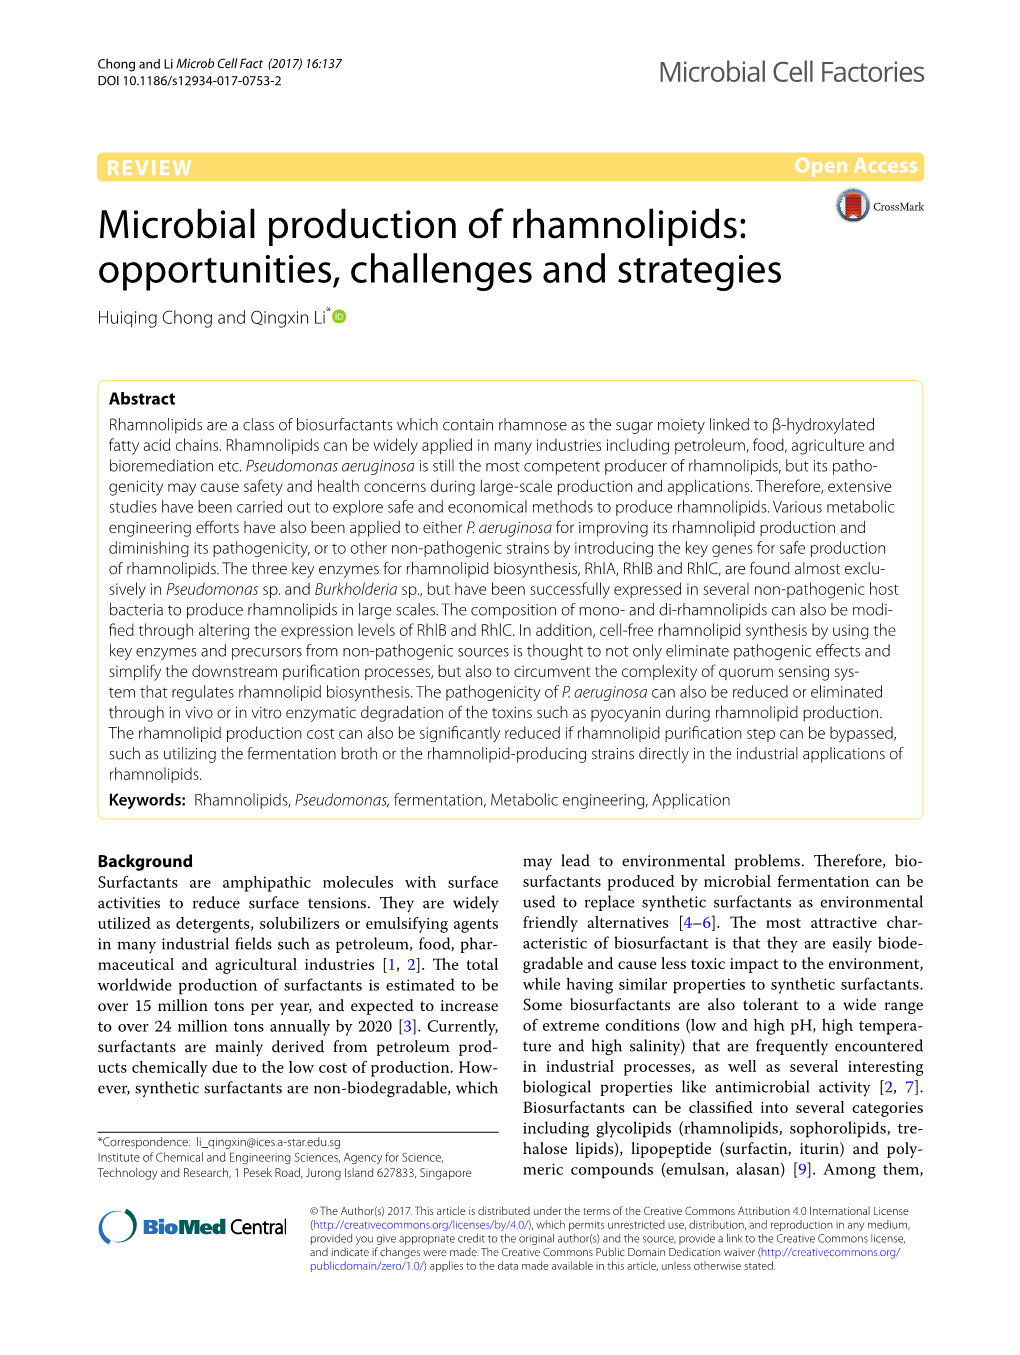 Microbial Production of Rhamnolipids: Opportunities, Challenges and Strategies Huiqing Chong and Qingxin Li*